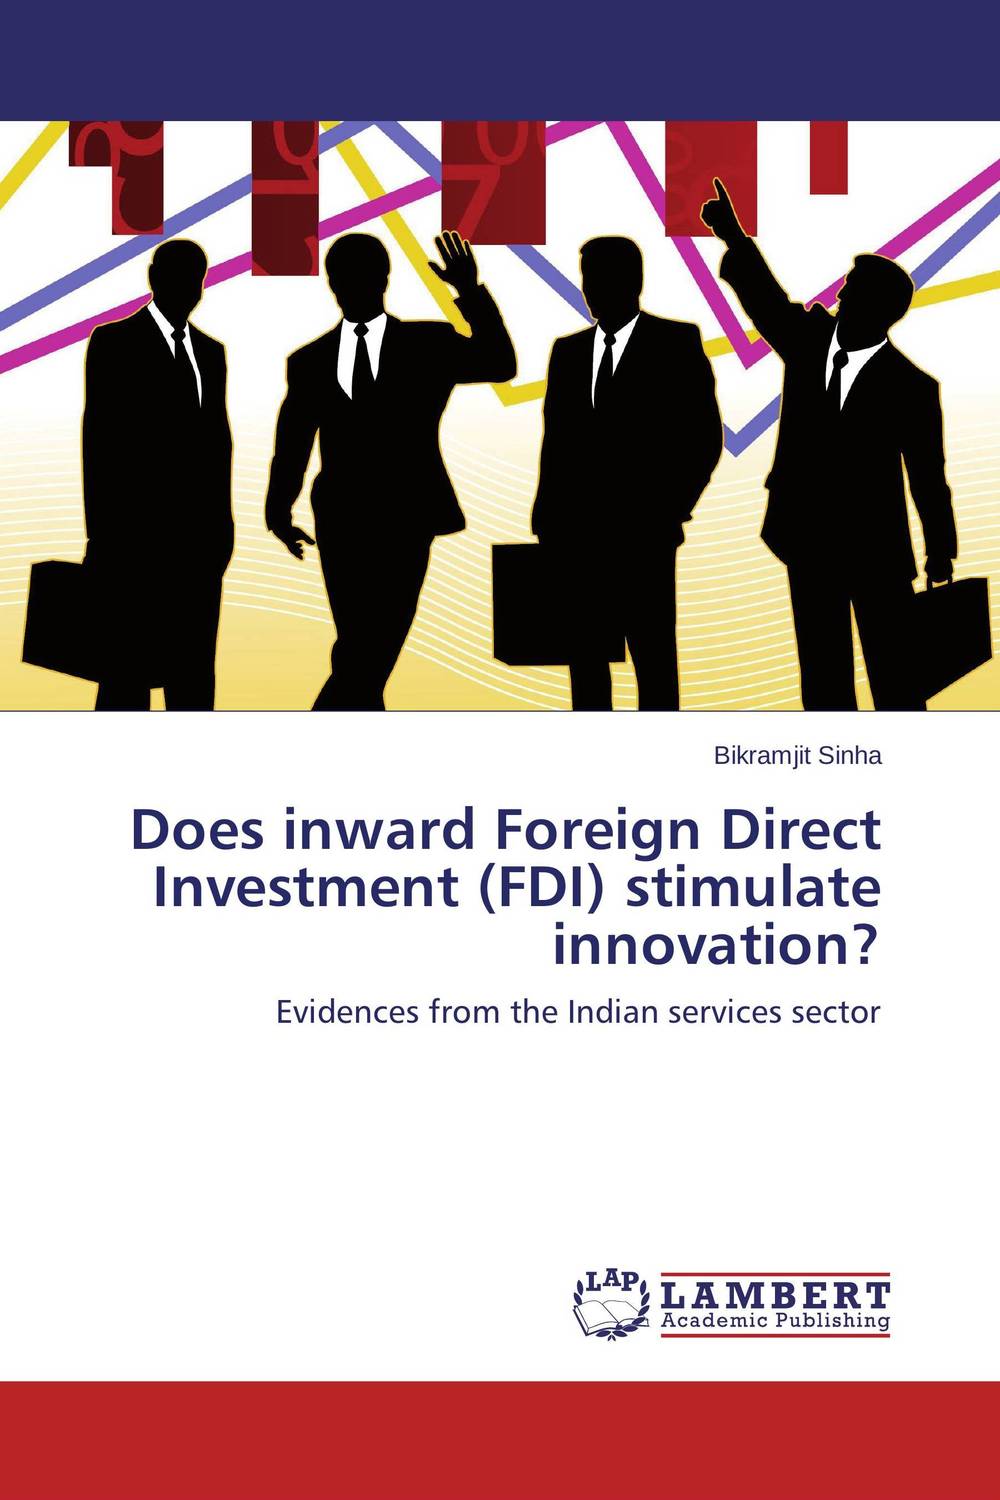 Does inward Foreign Direct Investment (FDI) stimulate innovation?